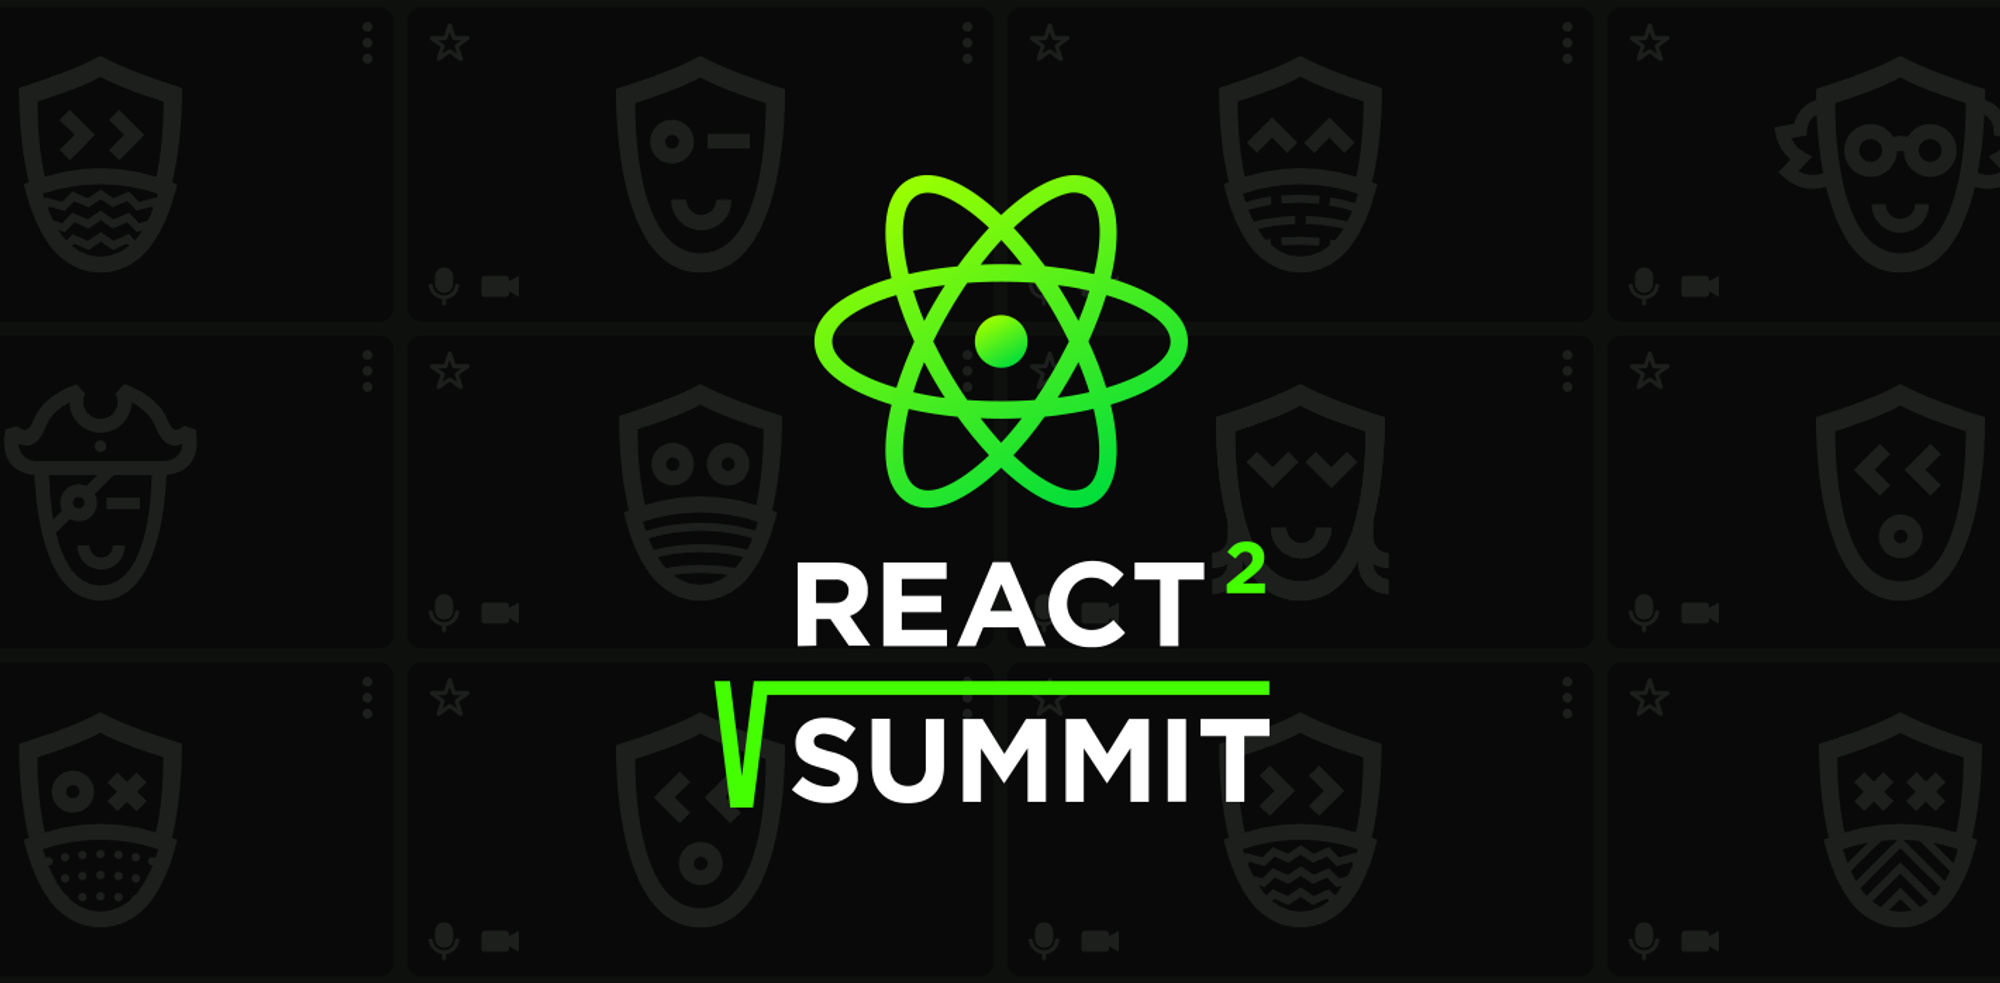 React Summit – The Biggest React Conference Worldwide